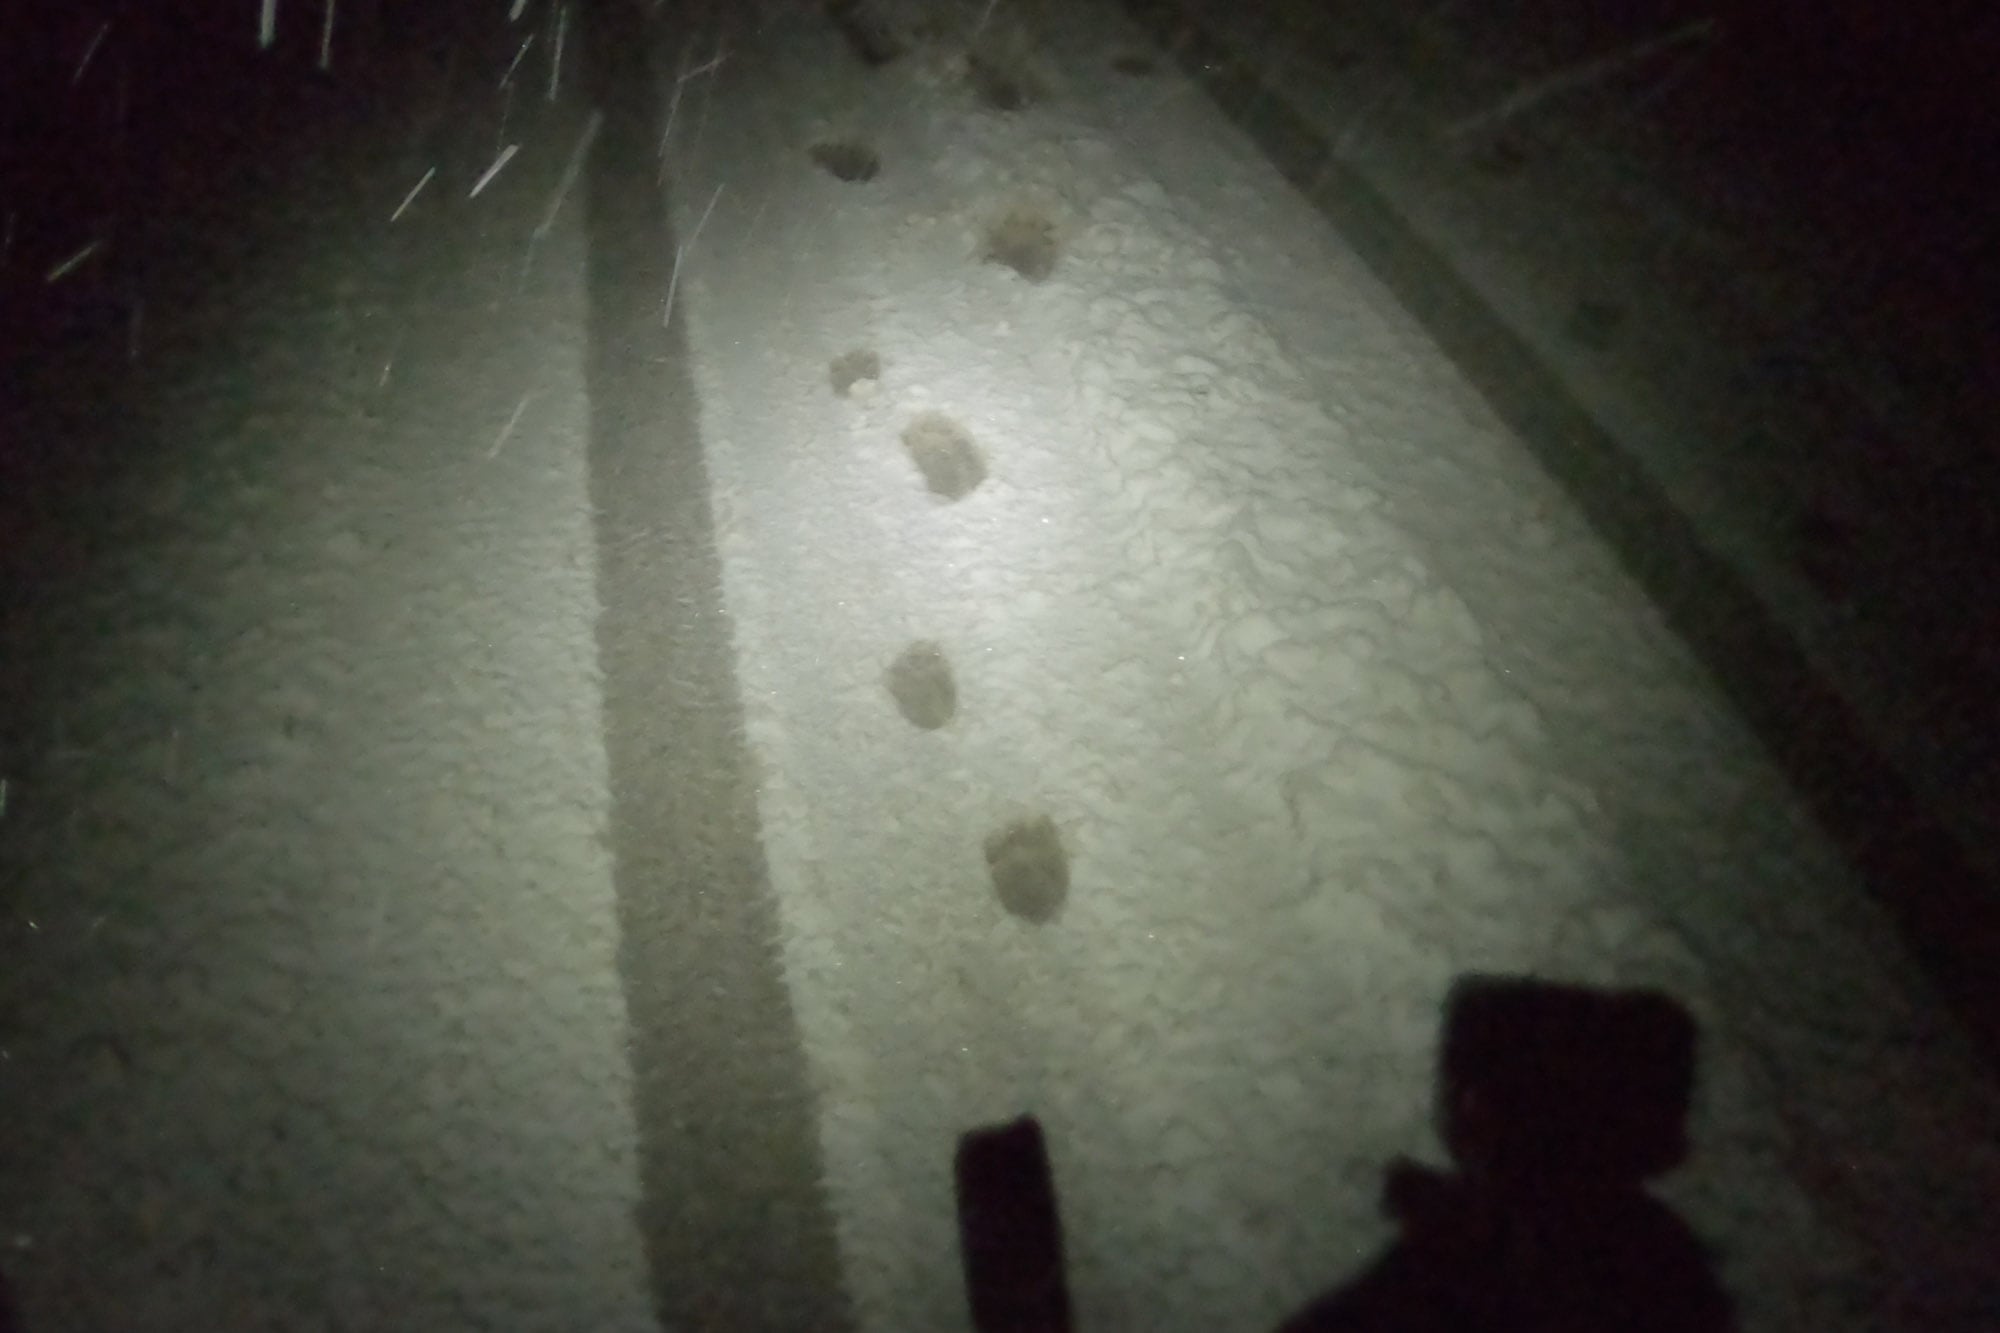 are these bear tracks?